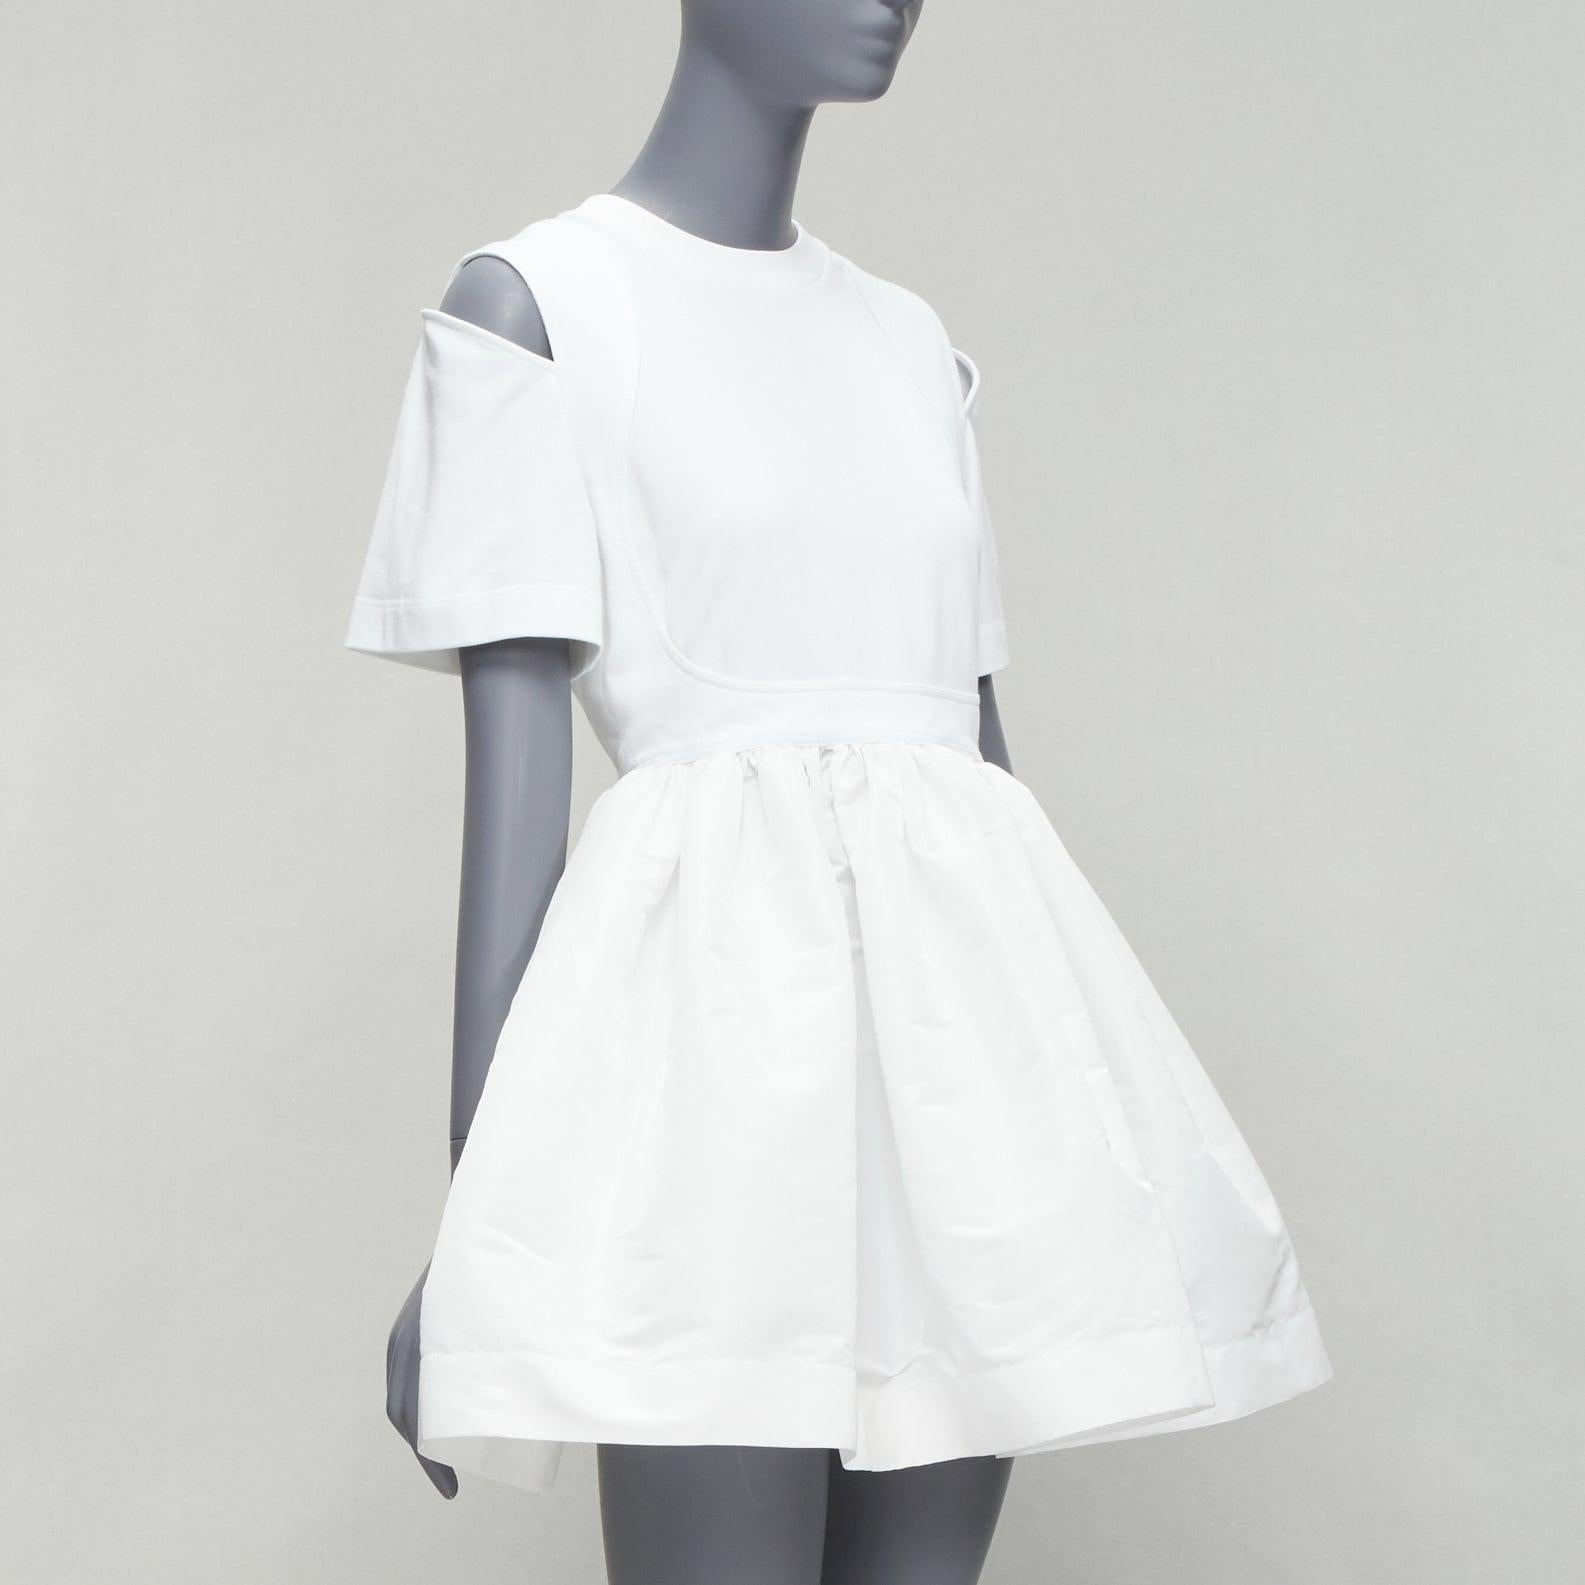 ALEXANDER MCQUEEN 2022 white cut out shoulder flared short dress IT38 XS
Reference: AAWC/A00508
Brand: Alexander McQueen
Designer: Sarah Burton
Collection: 2022
Material: Cotton, Polyester
Color: White
Pattern: Solid
Closure: Zip
Lining: White